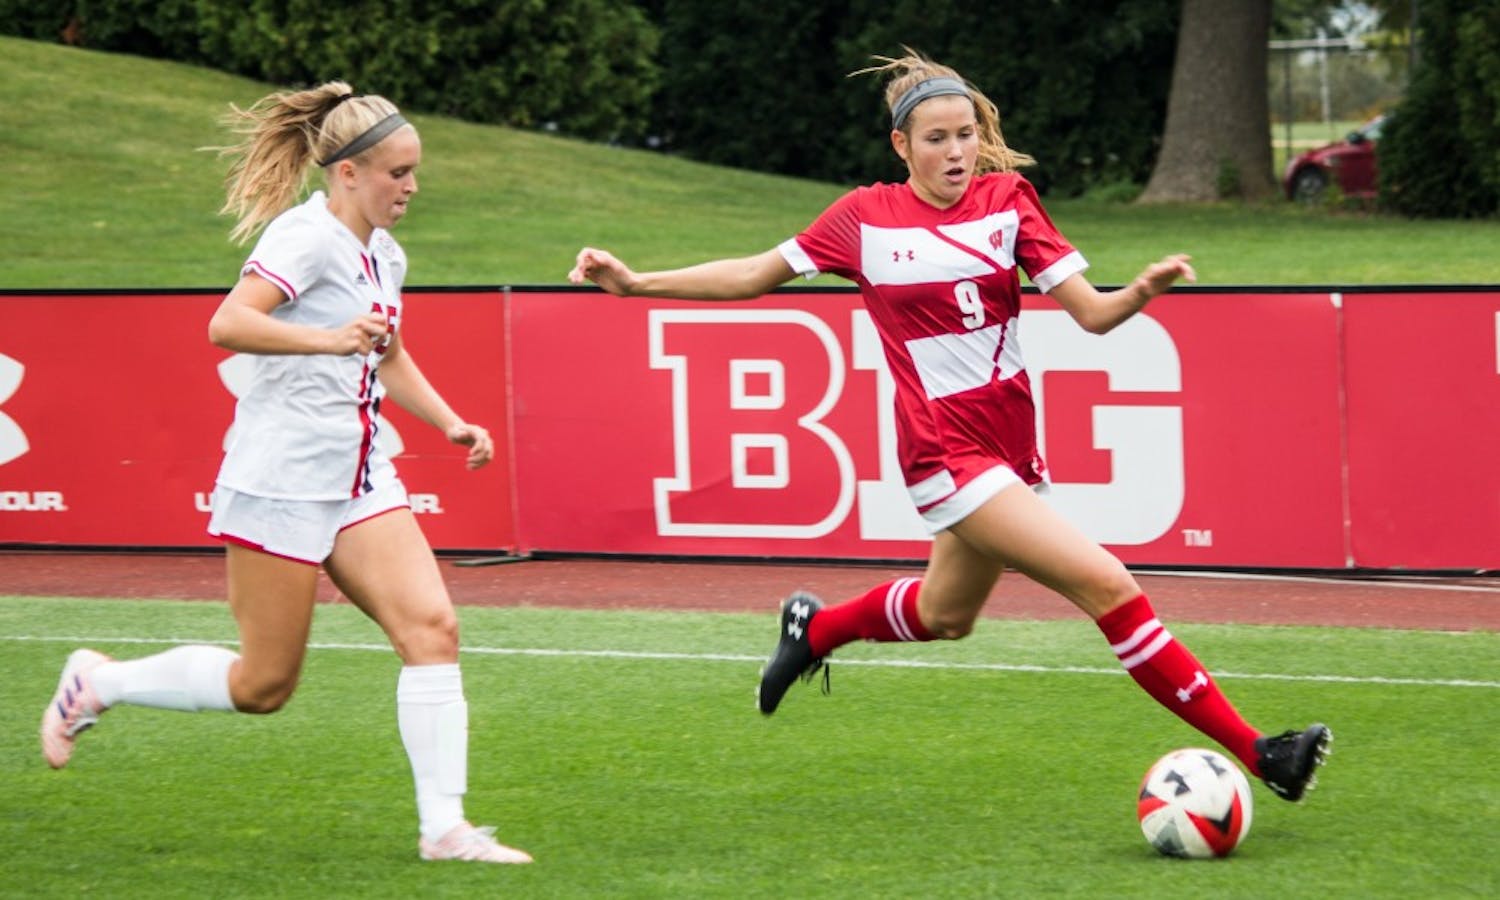 Sophomore forward&nbsp;Lauren Rice was able to strike a perfect shot two minutes into overtime to give the Badgers a win.